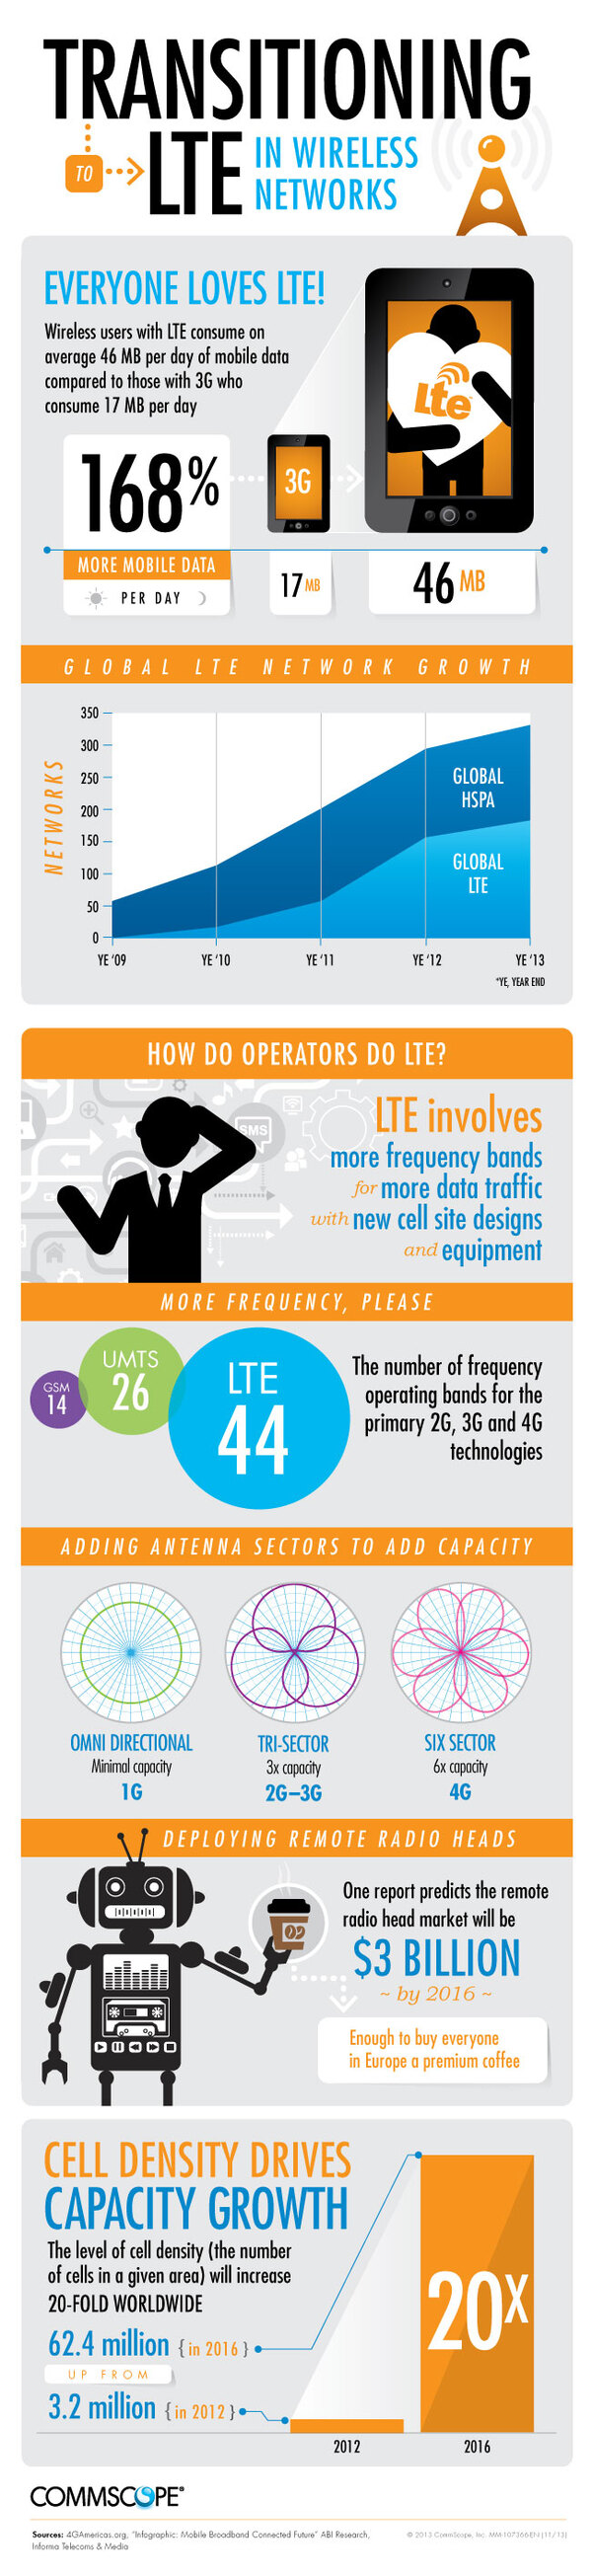 Infographic Transitioning to LTE in Wireless Networks